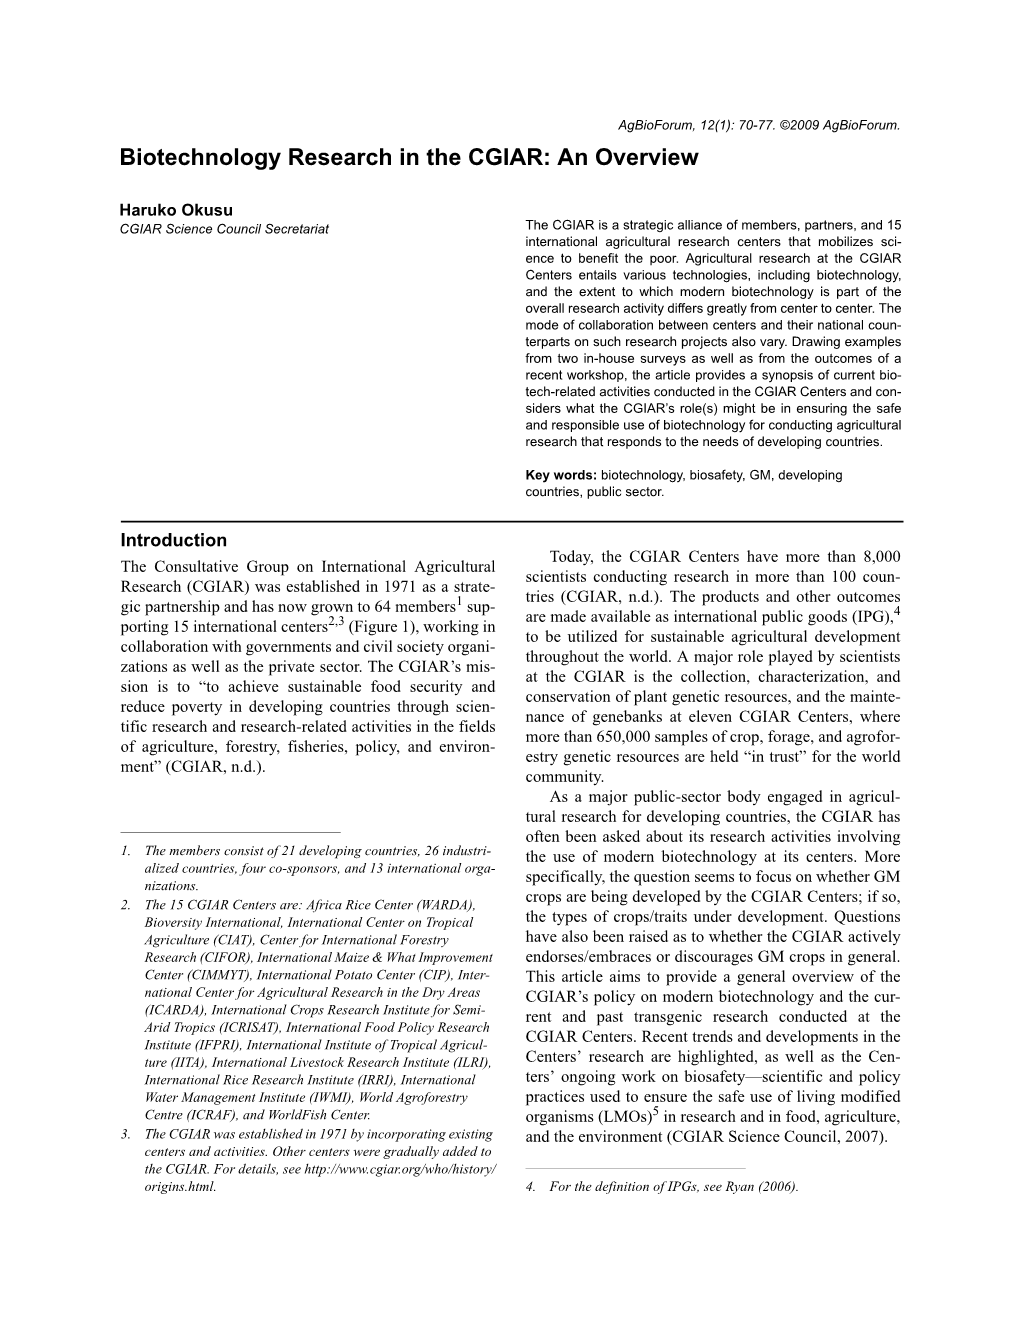 Biotechnology Research in the CGIAR: an Overview